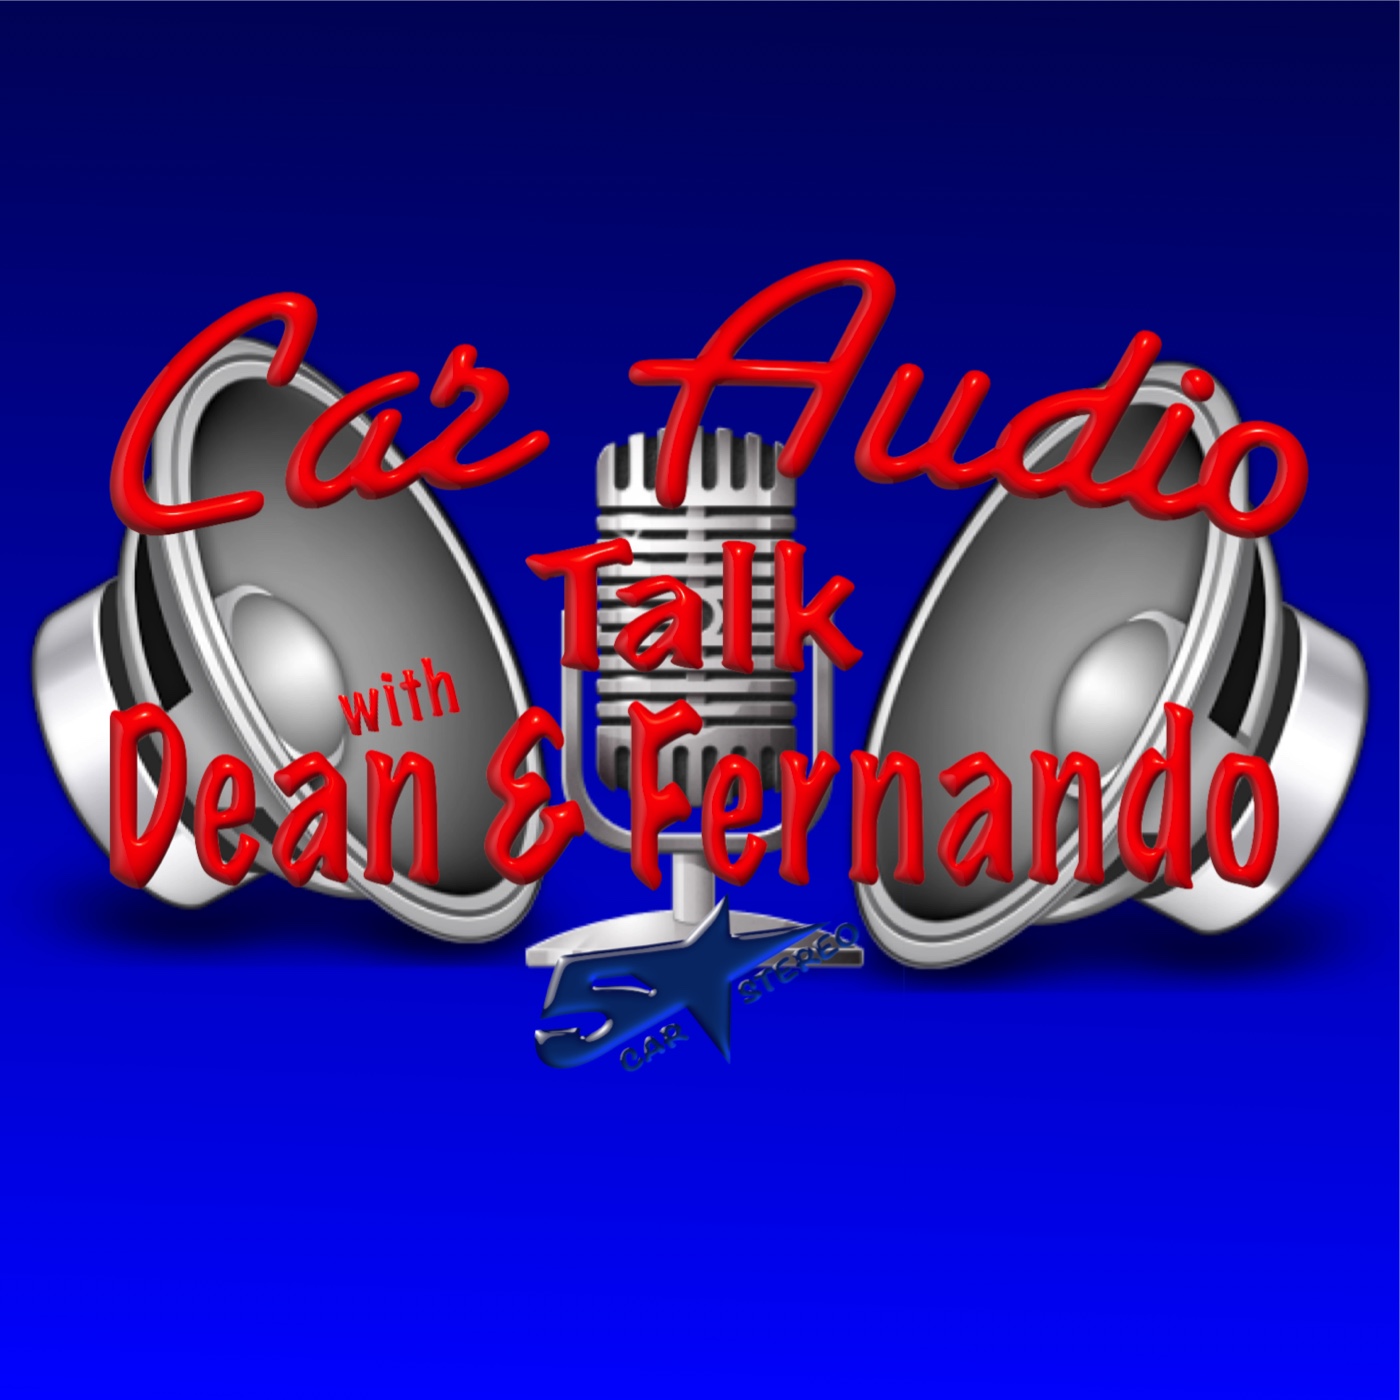 Lets talk about the show. Car Audio Talk with Dean and Fernado the Podcast episode 8